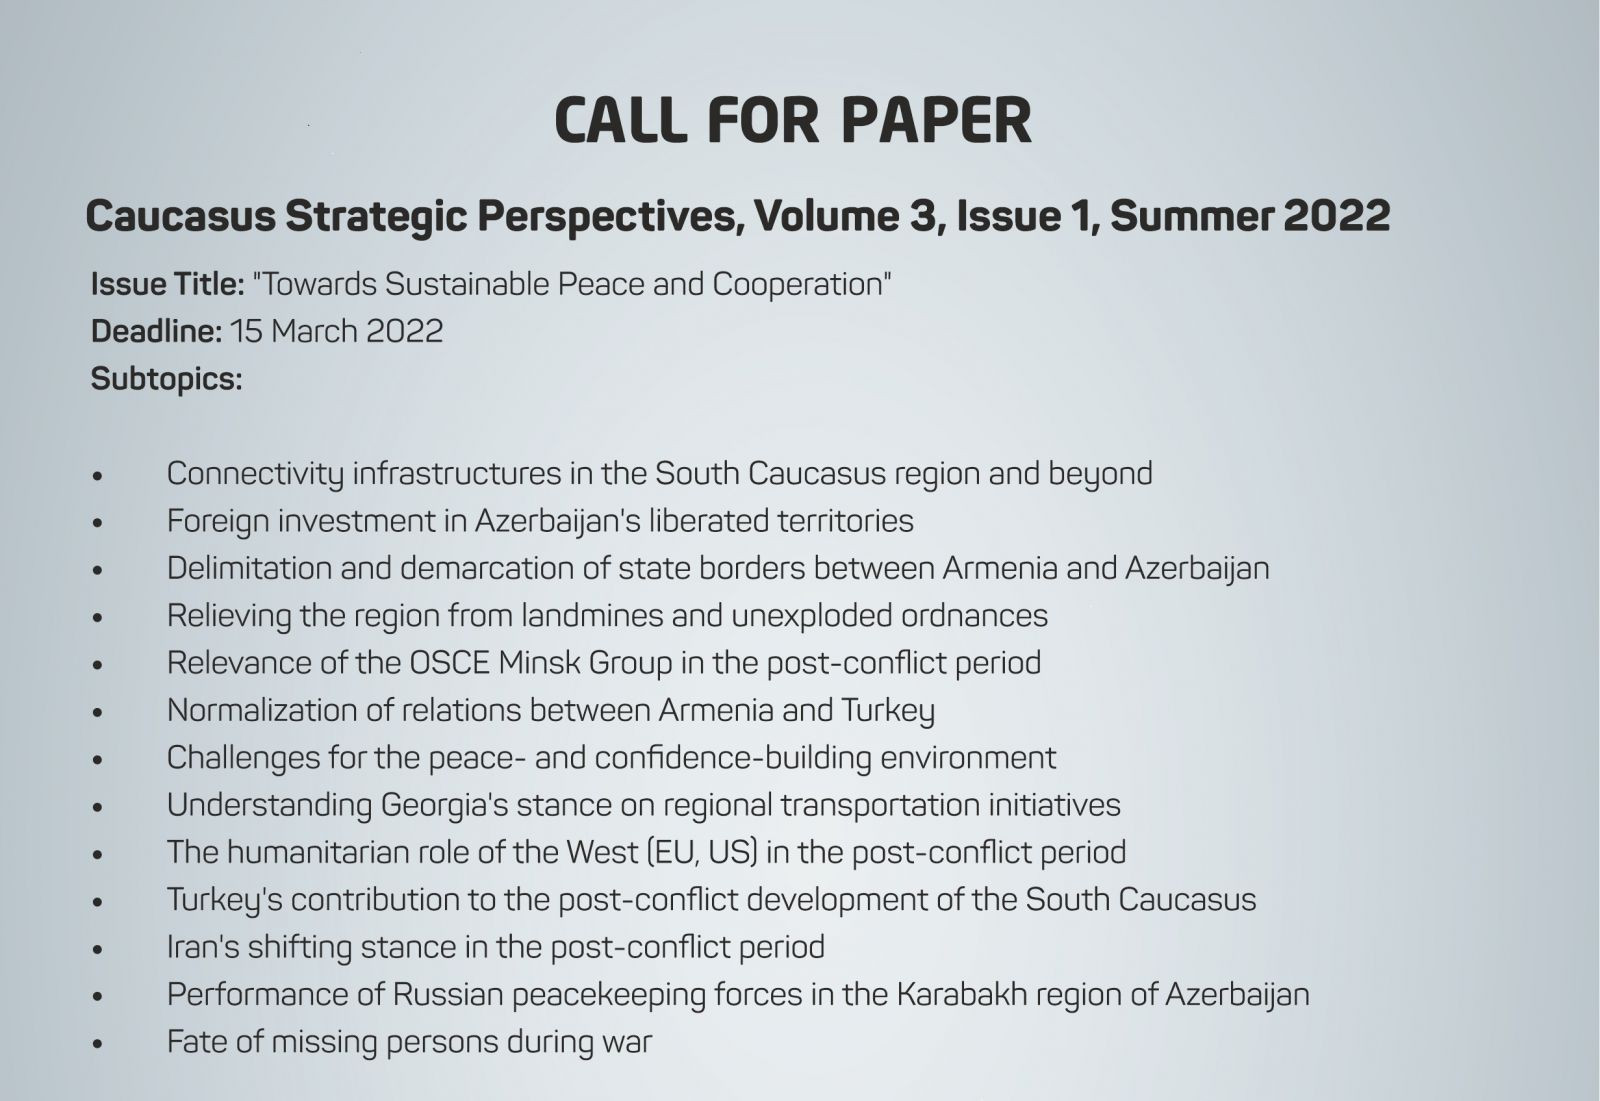 Call for Submissions - Caucasus Strategic Perspectives, Volume 3, Issue 1, Summer 2022